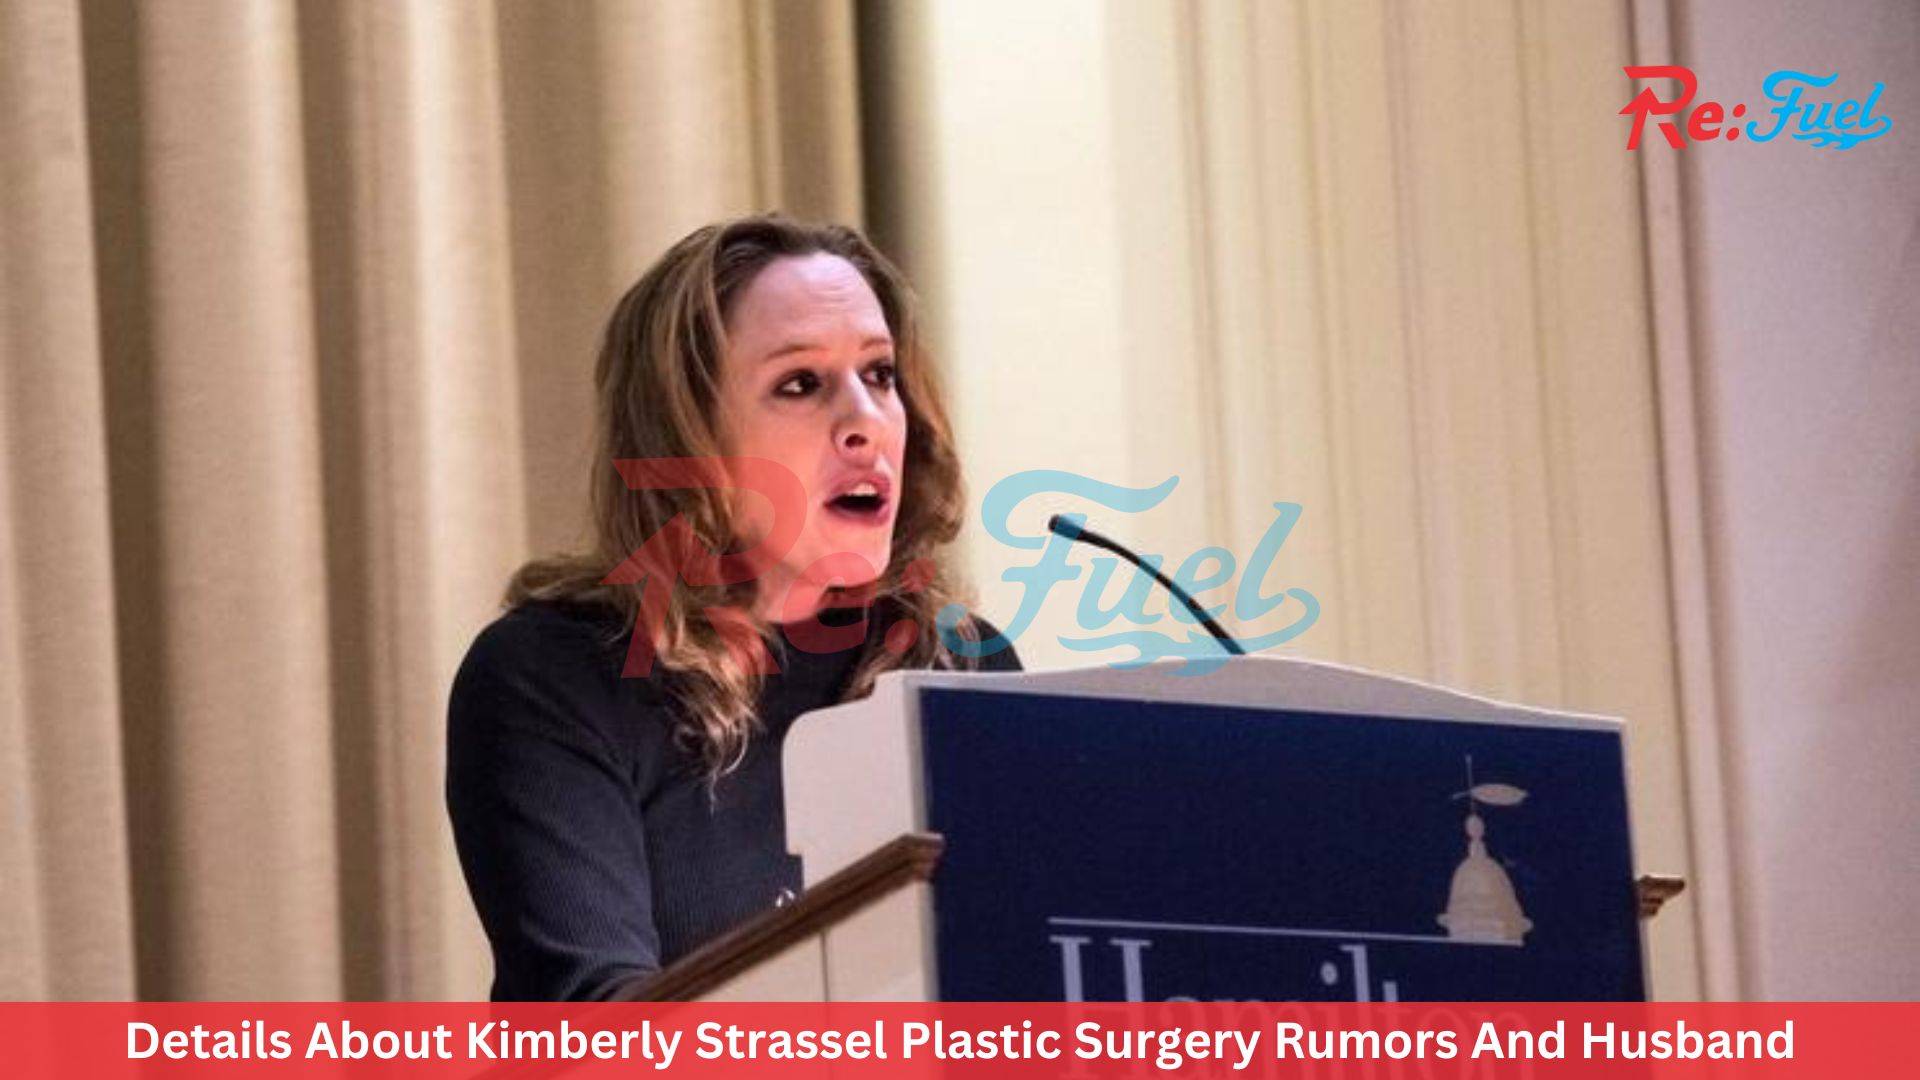 Details About Kimberley Strassel Plastic Surgery Rumors And Husband